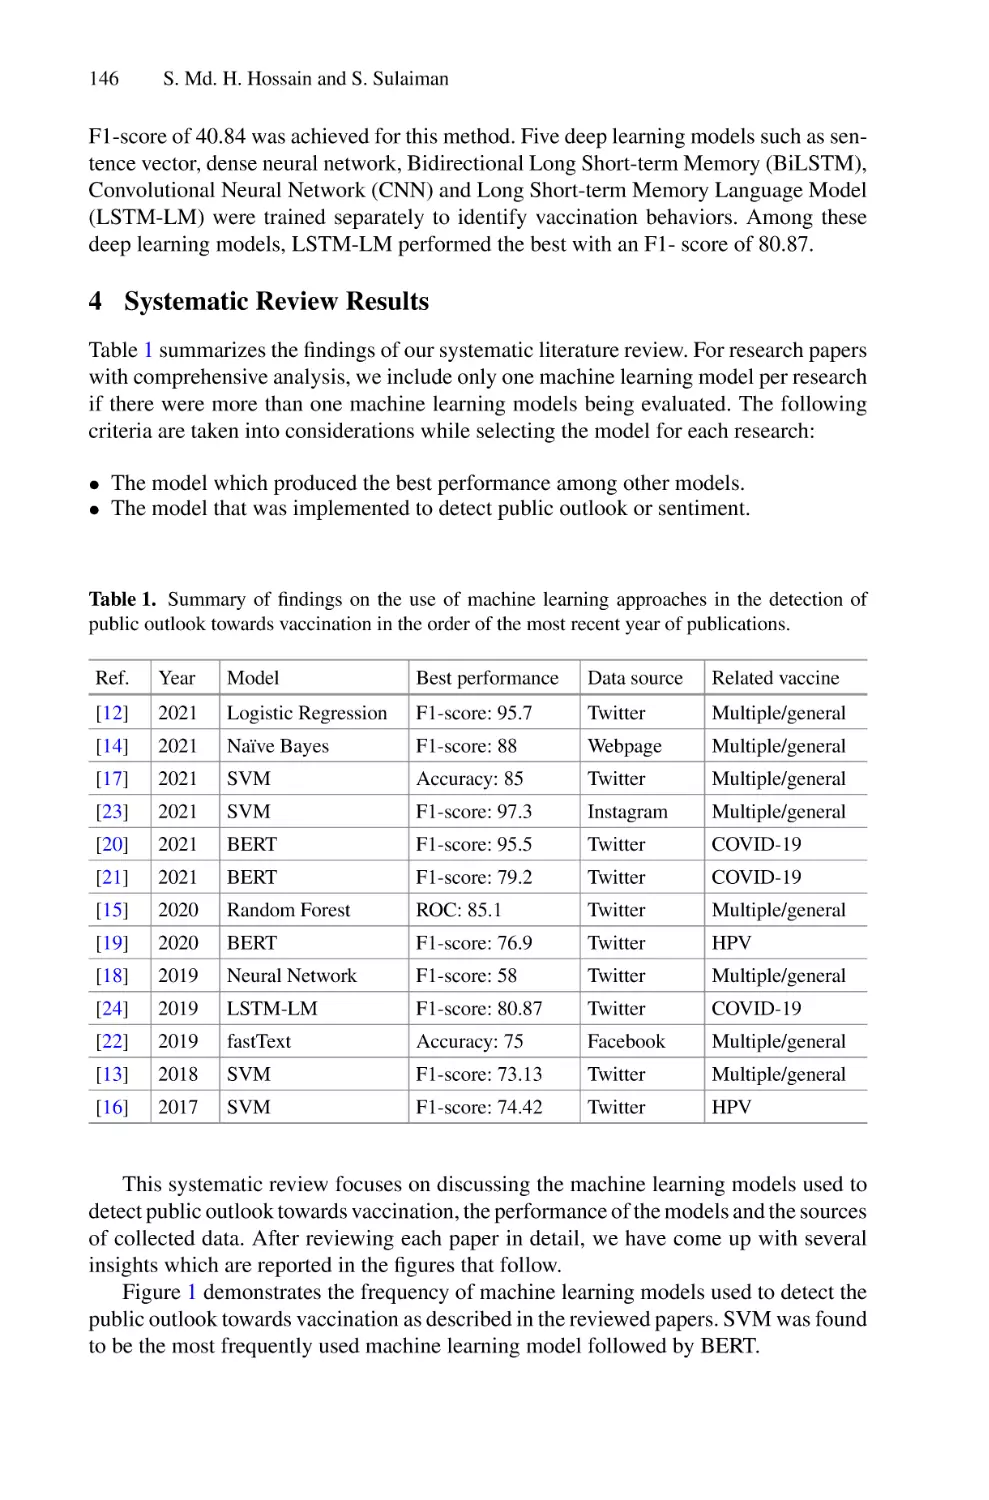 4 Systematic Review Results